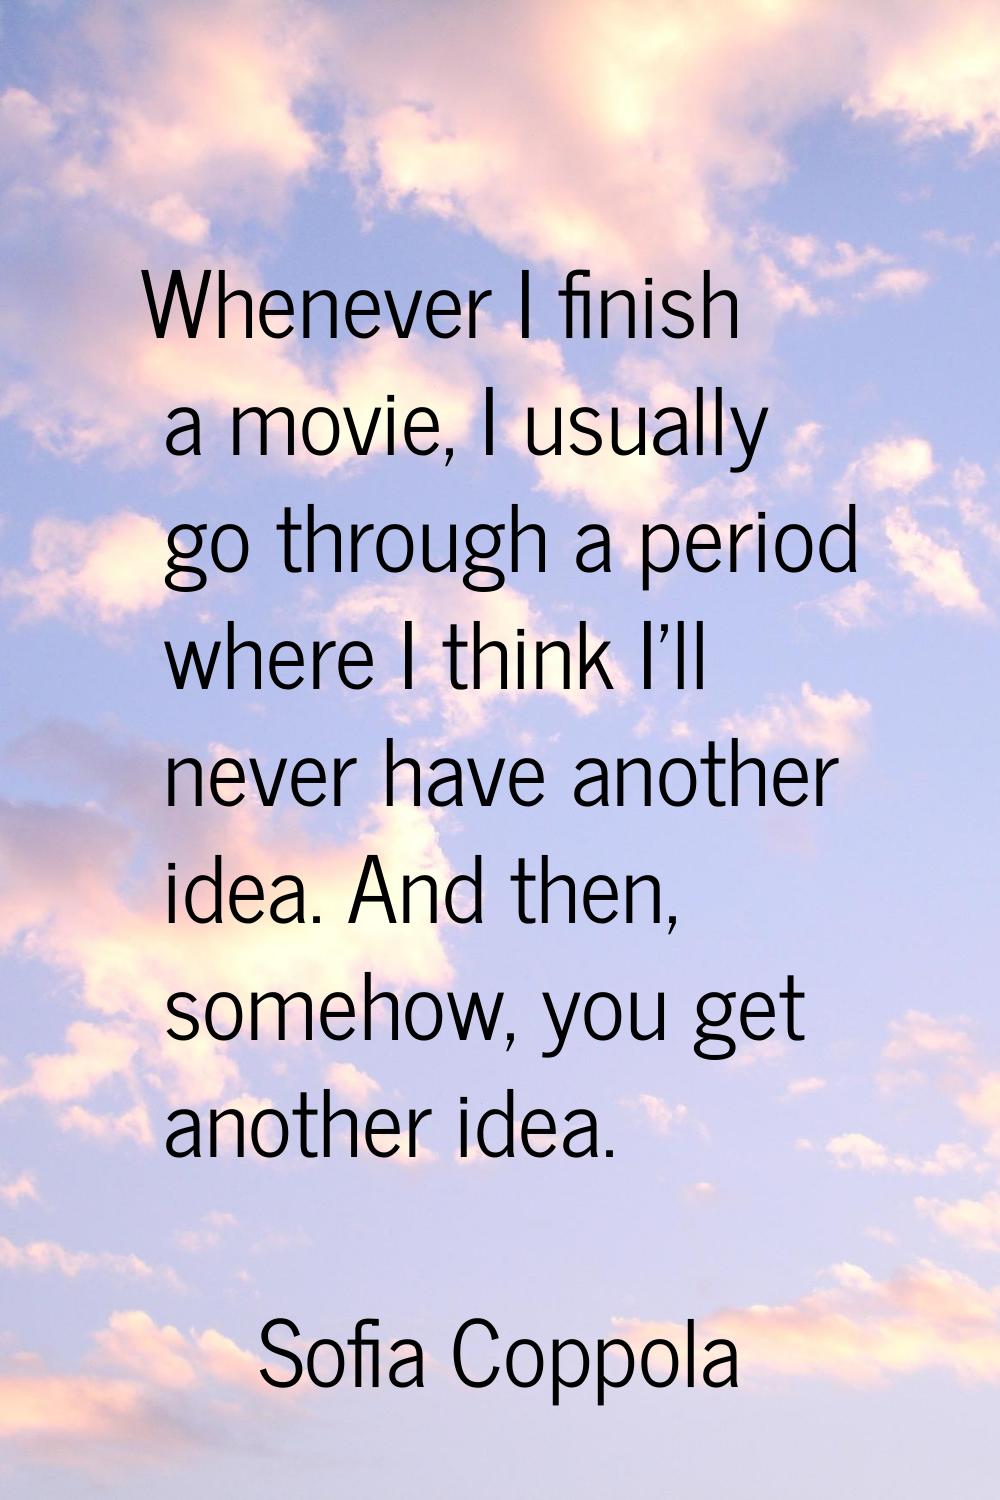 Whenever I finish a movie, I usually go through a period where I think I'll never have another idea